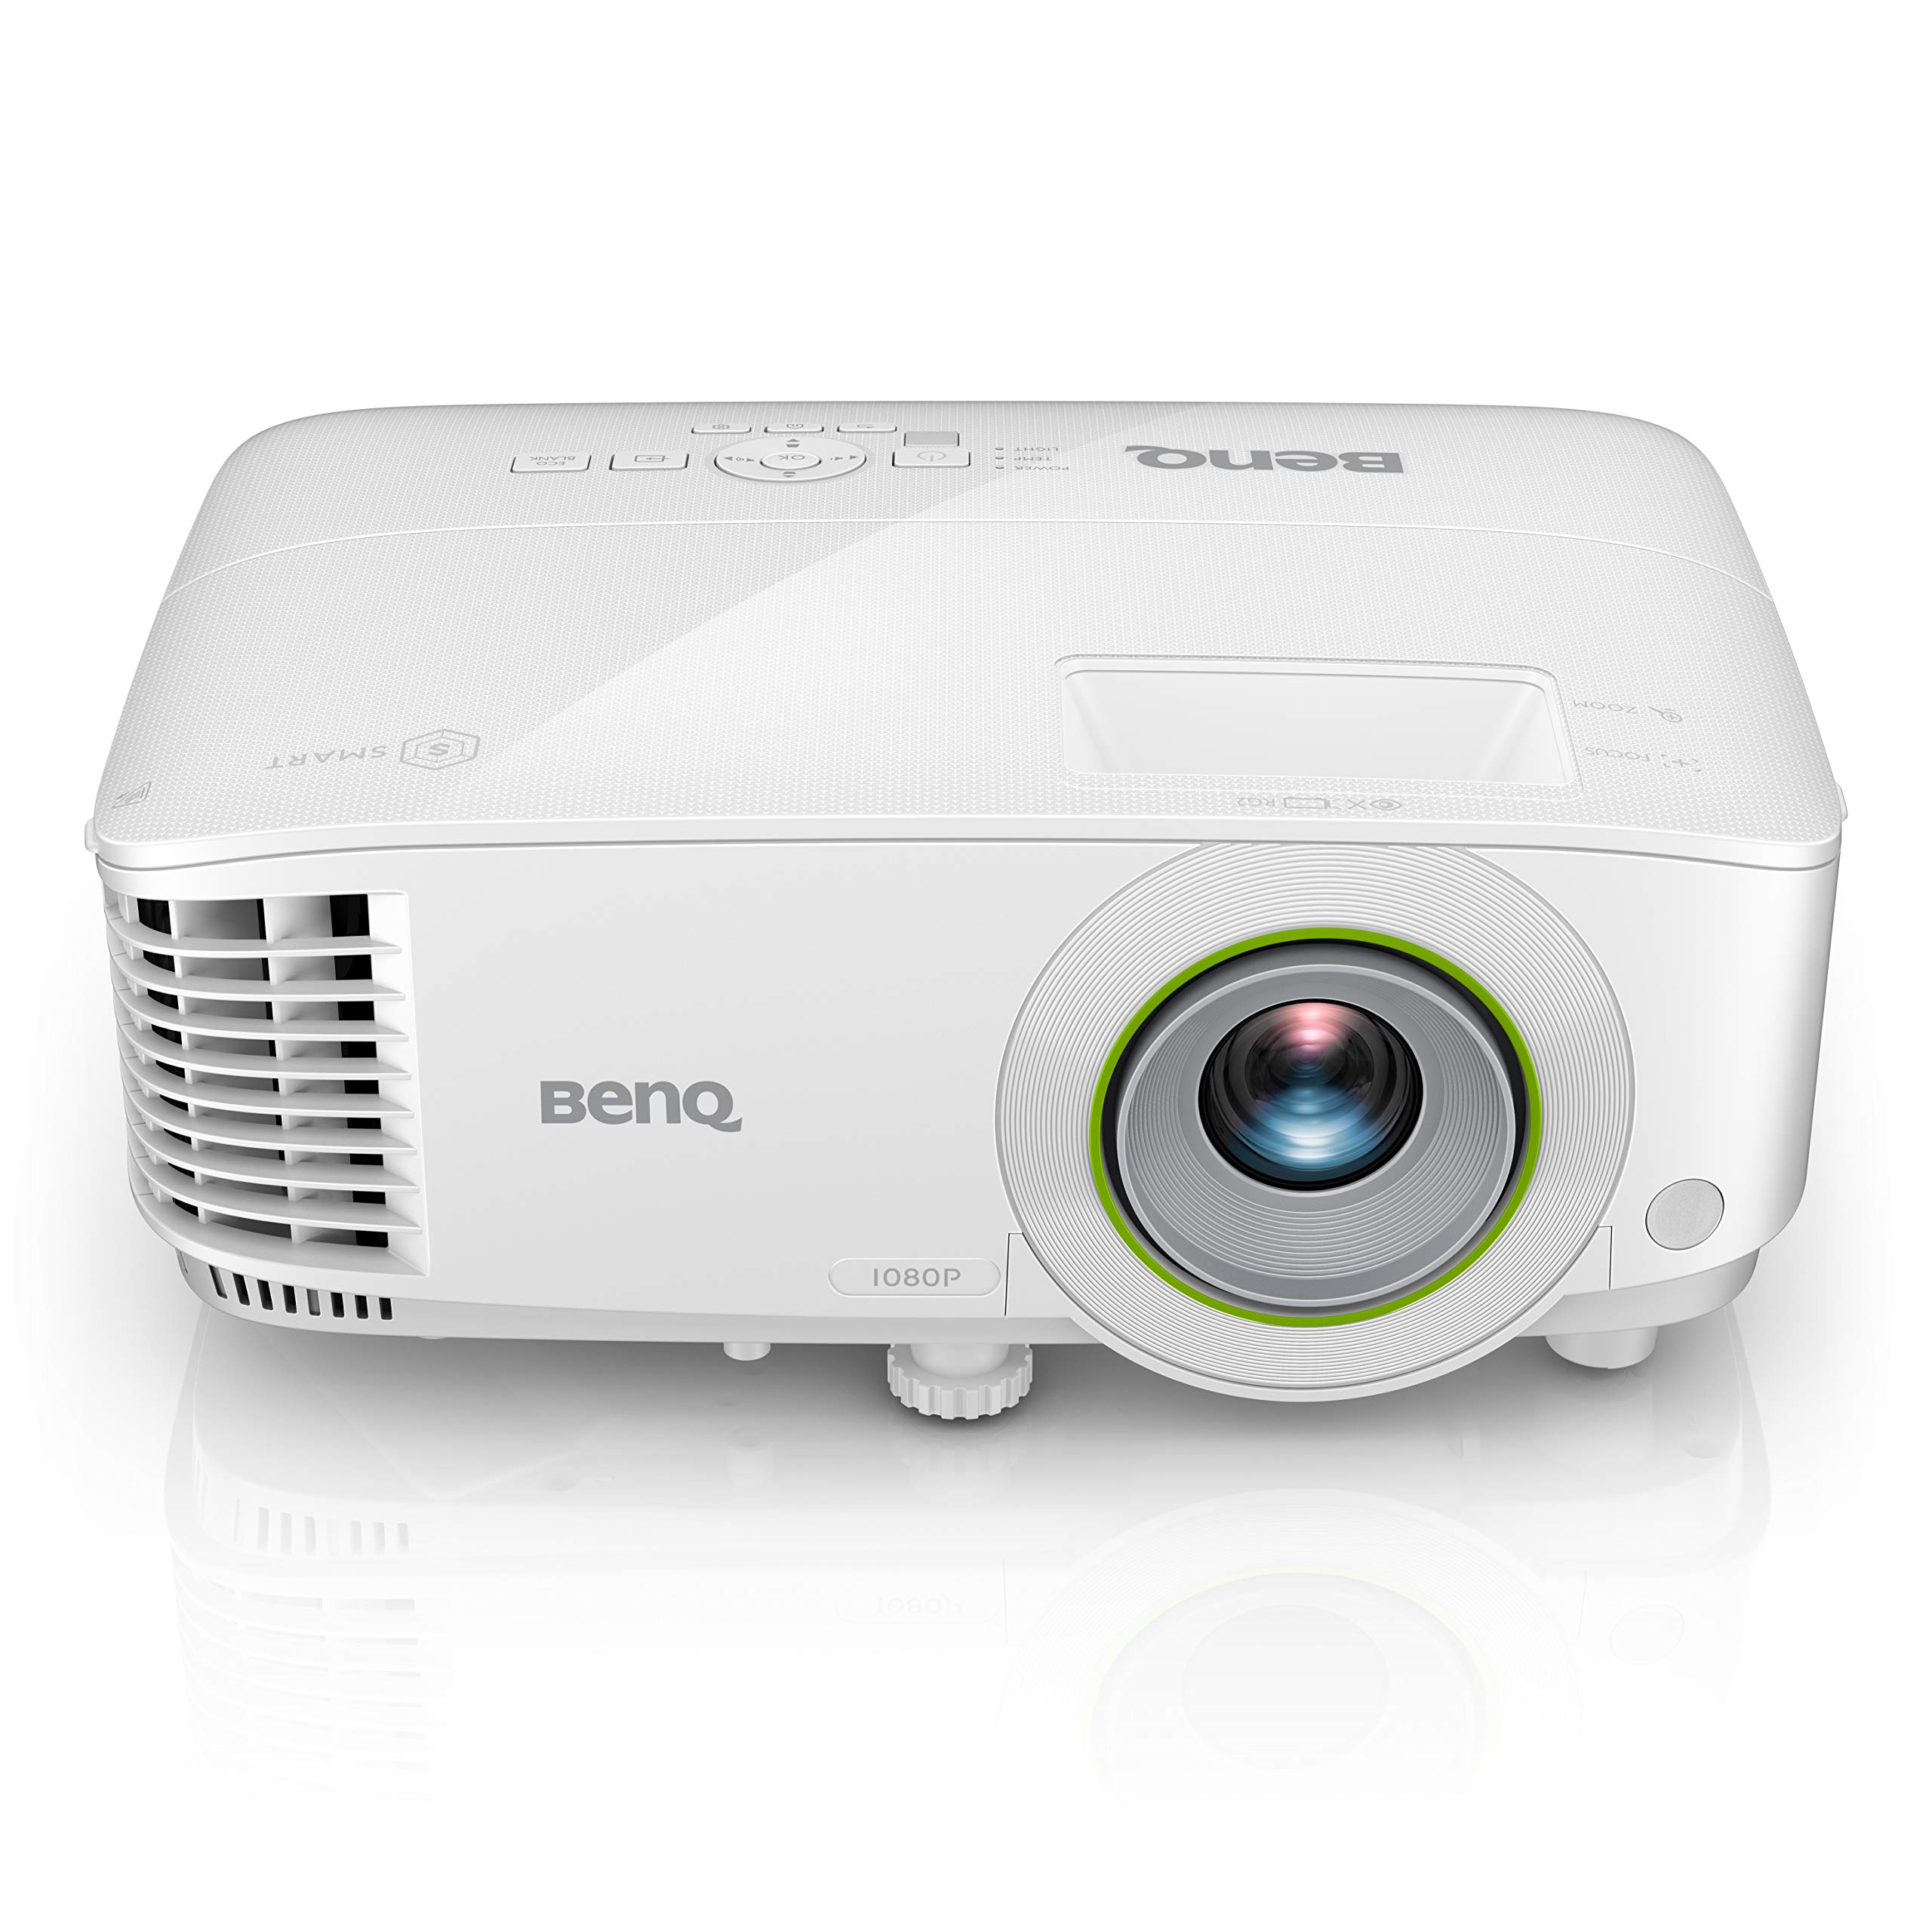 BenQ EH600 Wireless 1080p Portable Smart Business Projector | iPhone & Android Mirroring Compatibility | Built-In Apps & Internet Browser for Easy Presentations | Convenient Over-the-air Update